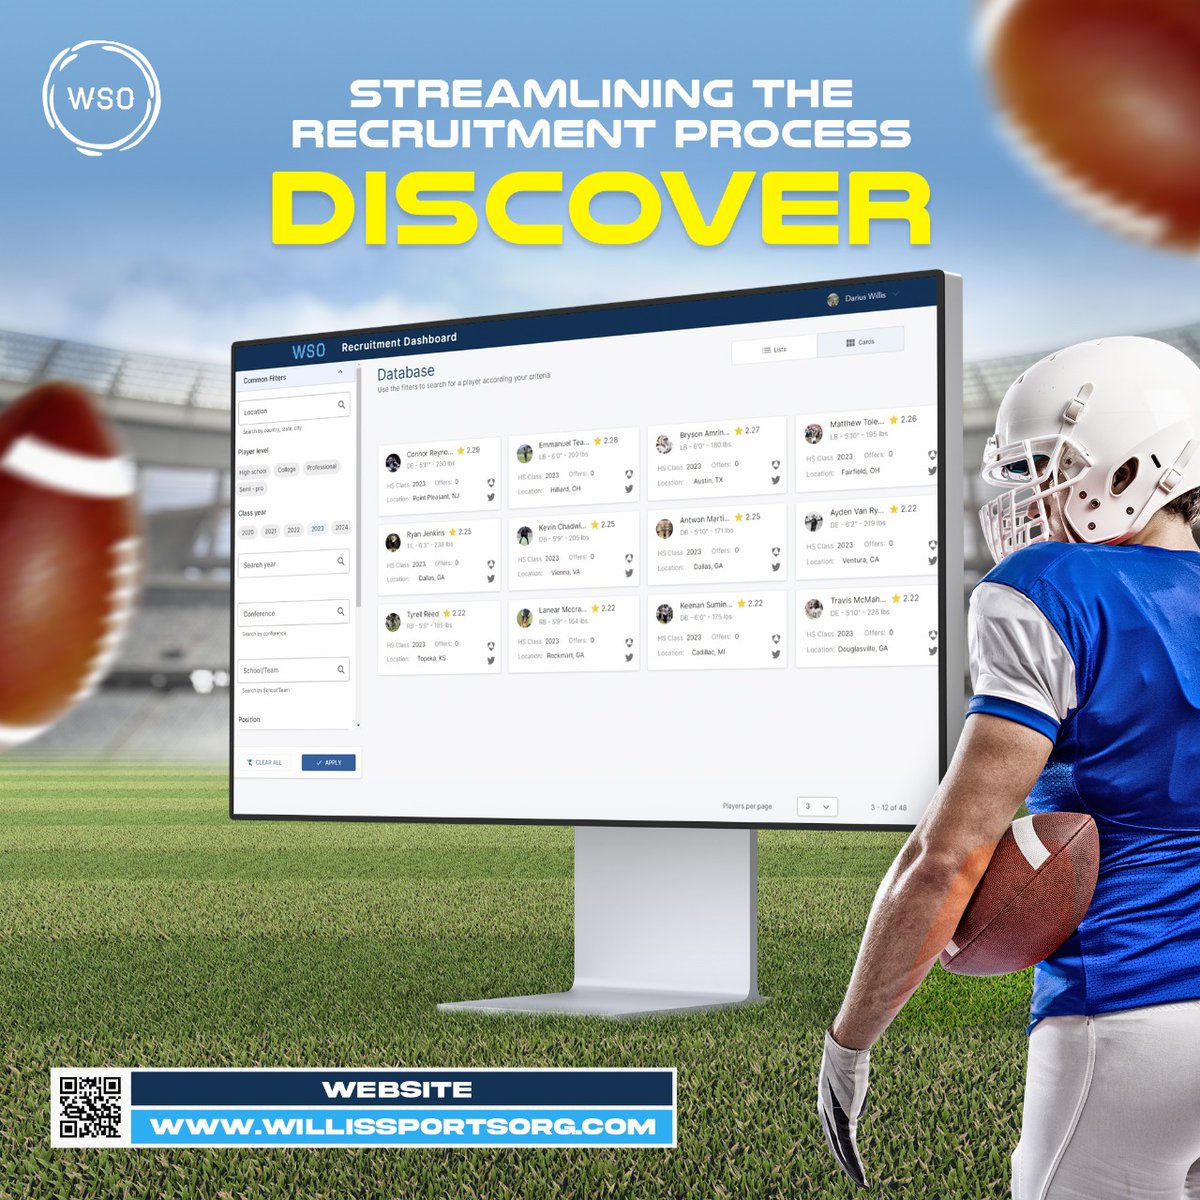 Join and get access to the WSO Recruitment Dashboard free trial. #football #coaches #product #sportstech #data #athletes #analytics #scores #filters #scouting #recruiting #discover #automatedsolutions #naia #juco #ncaa 
willissportsorg.com